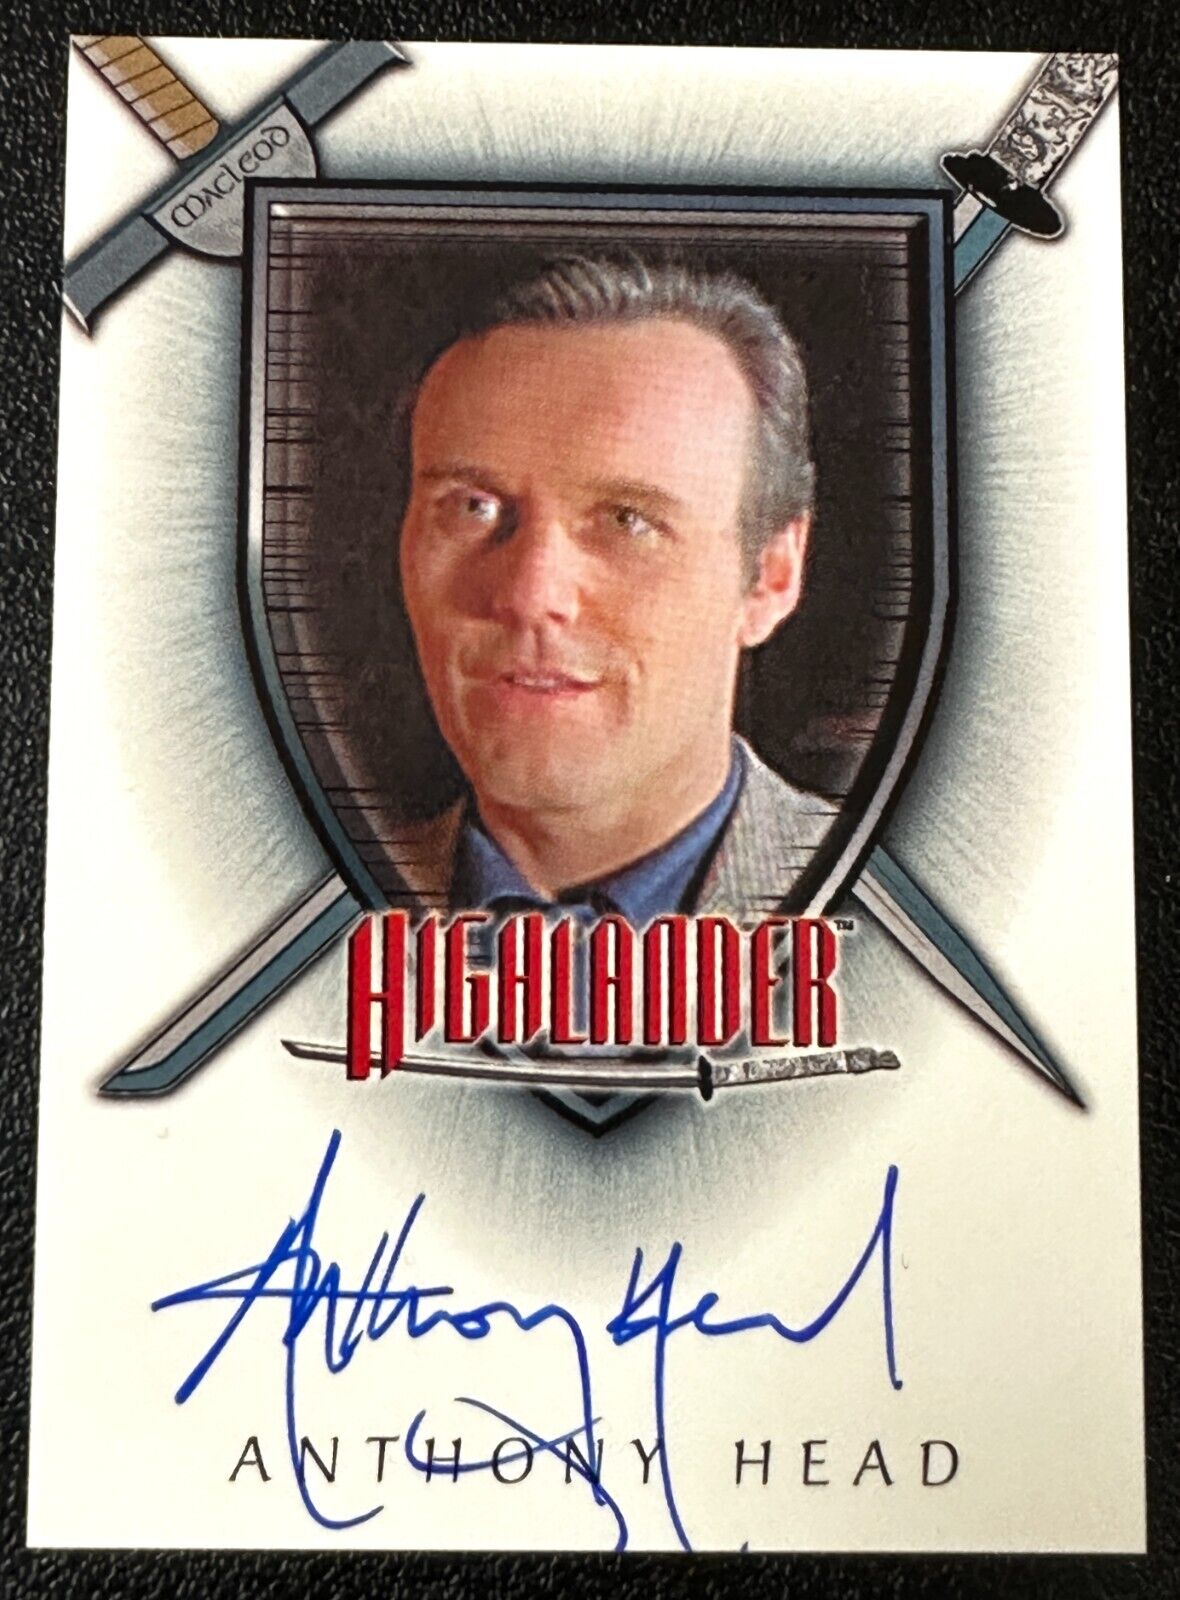 2003 The Complete Highlander (TV) Autograph Card Signed by Anthony Head A15